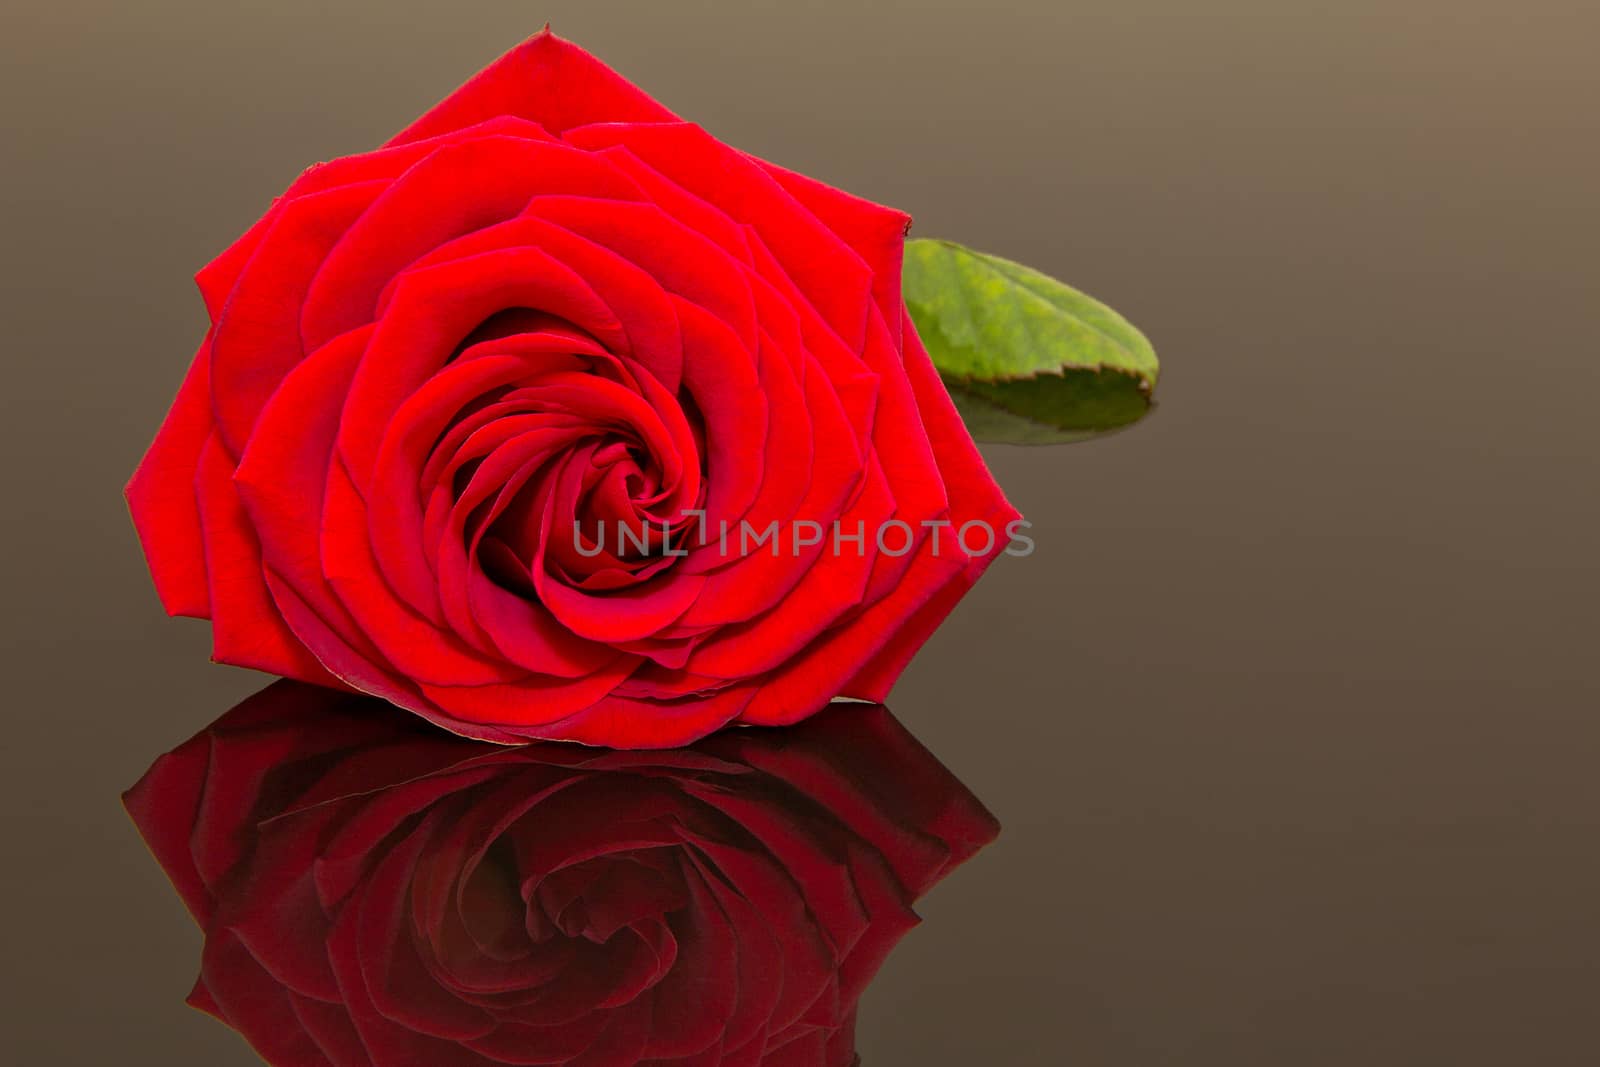 beautiful  single red rose isolated on dark  background